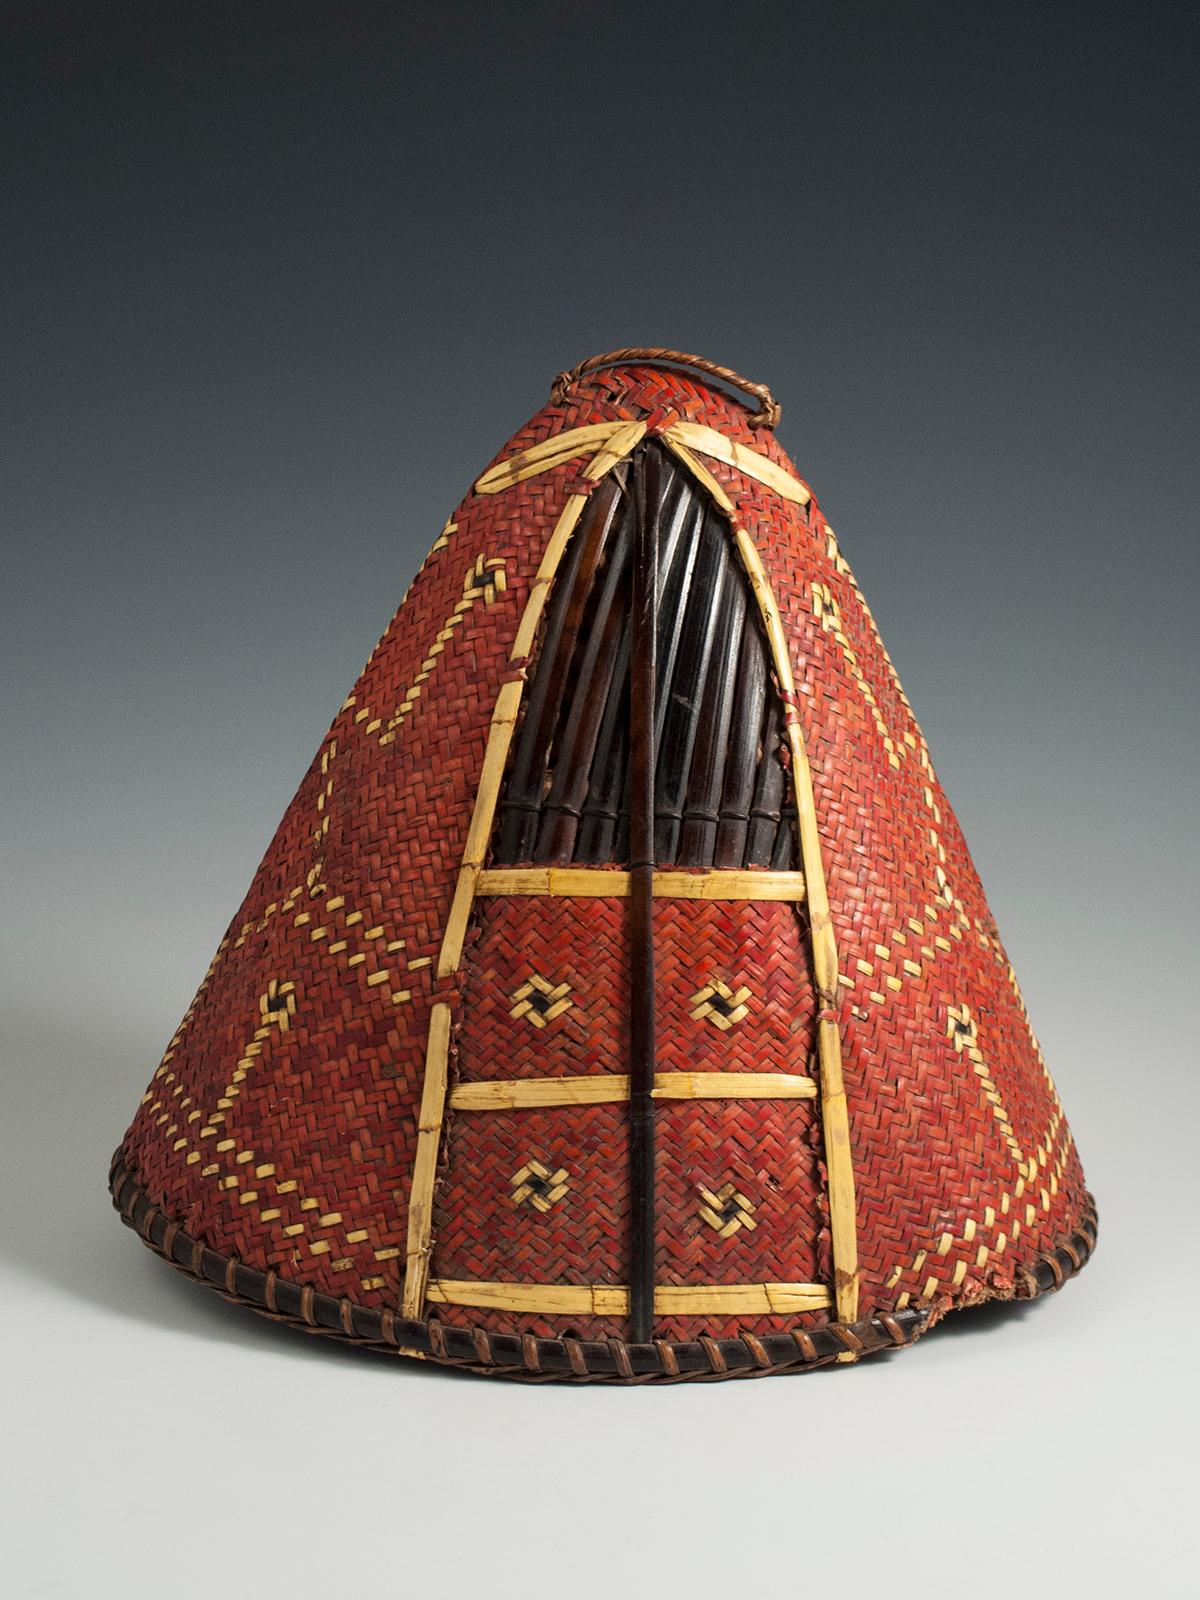 Hand-Crafted Early to Mid-20th Century Tribal Hat, Naga People, Northeastern India